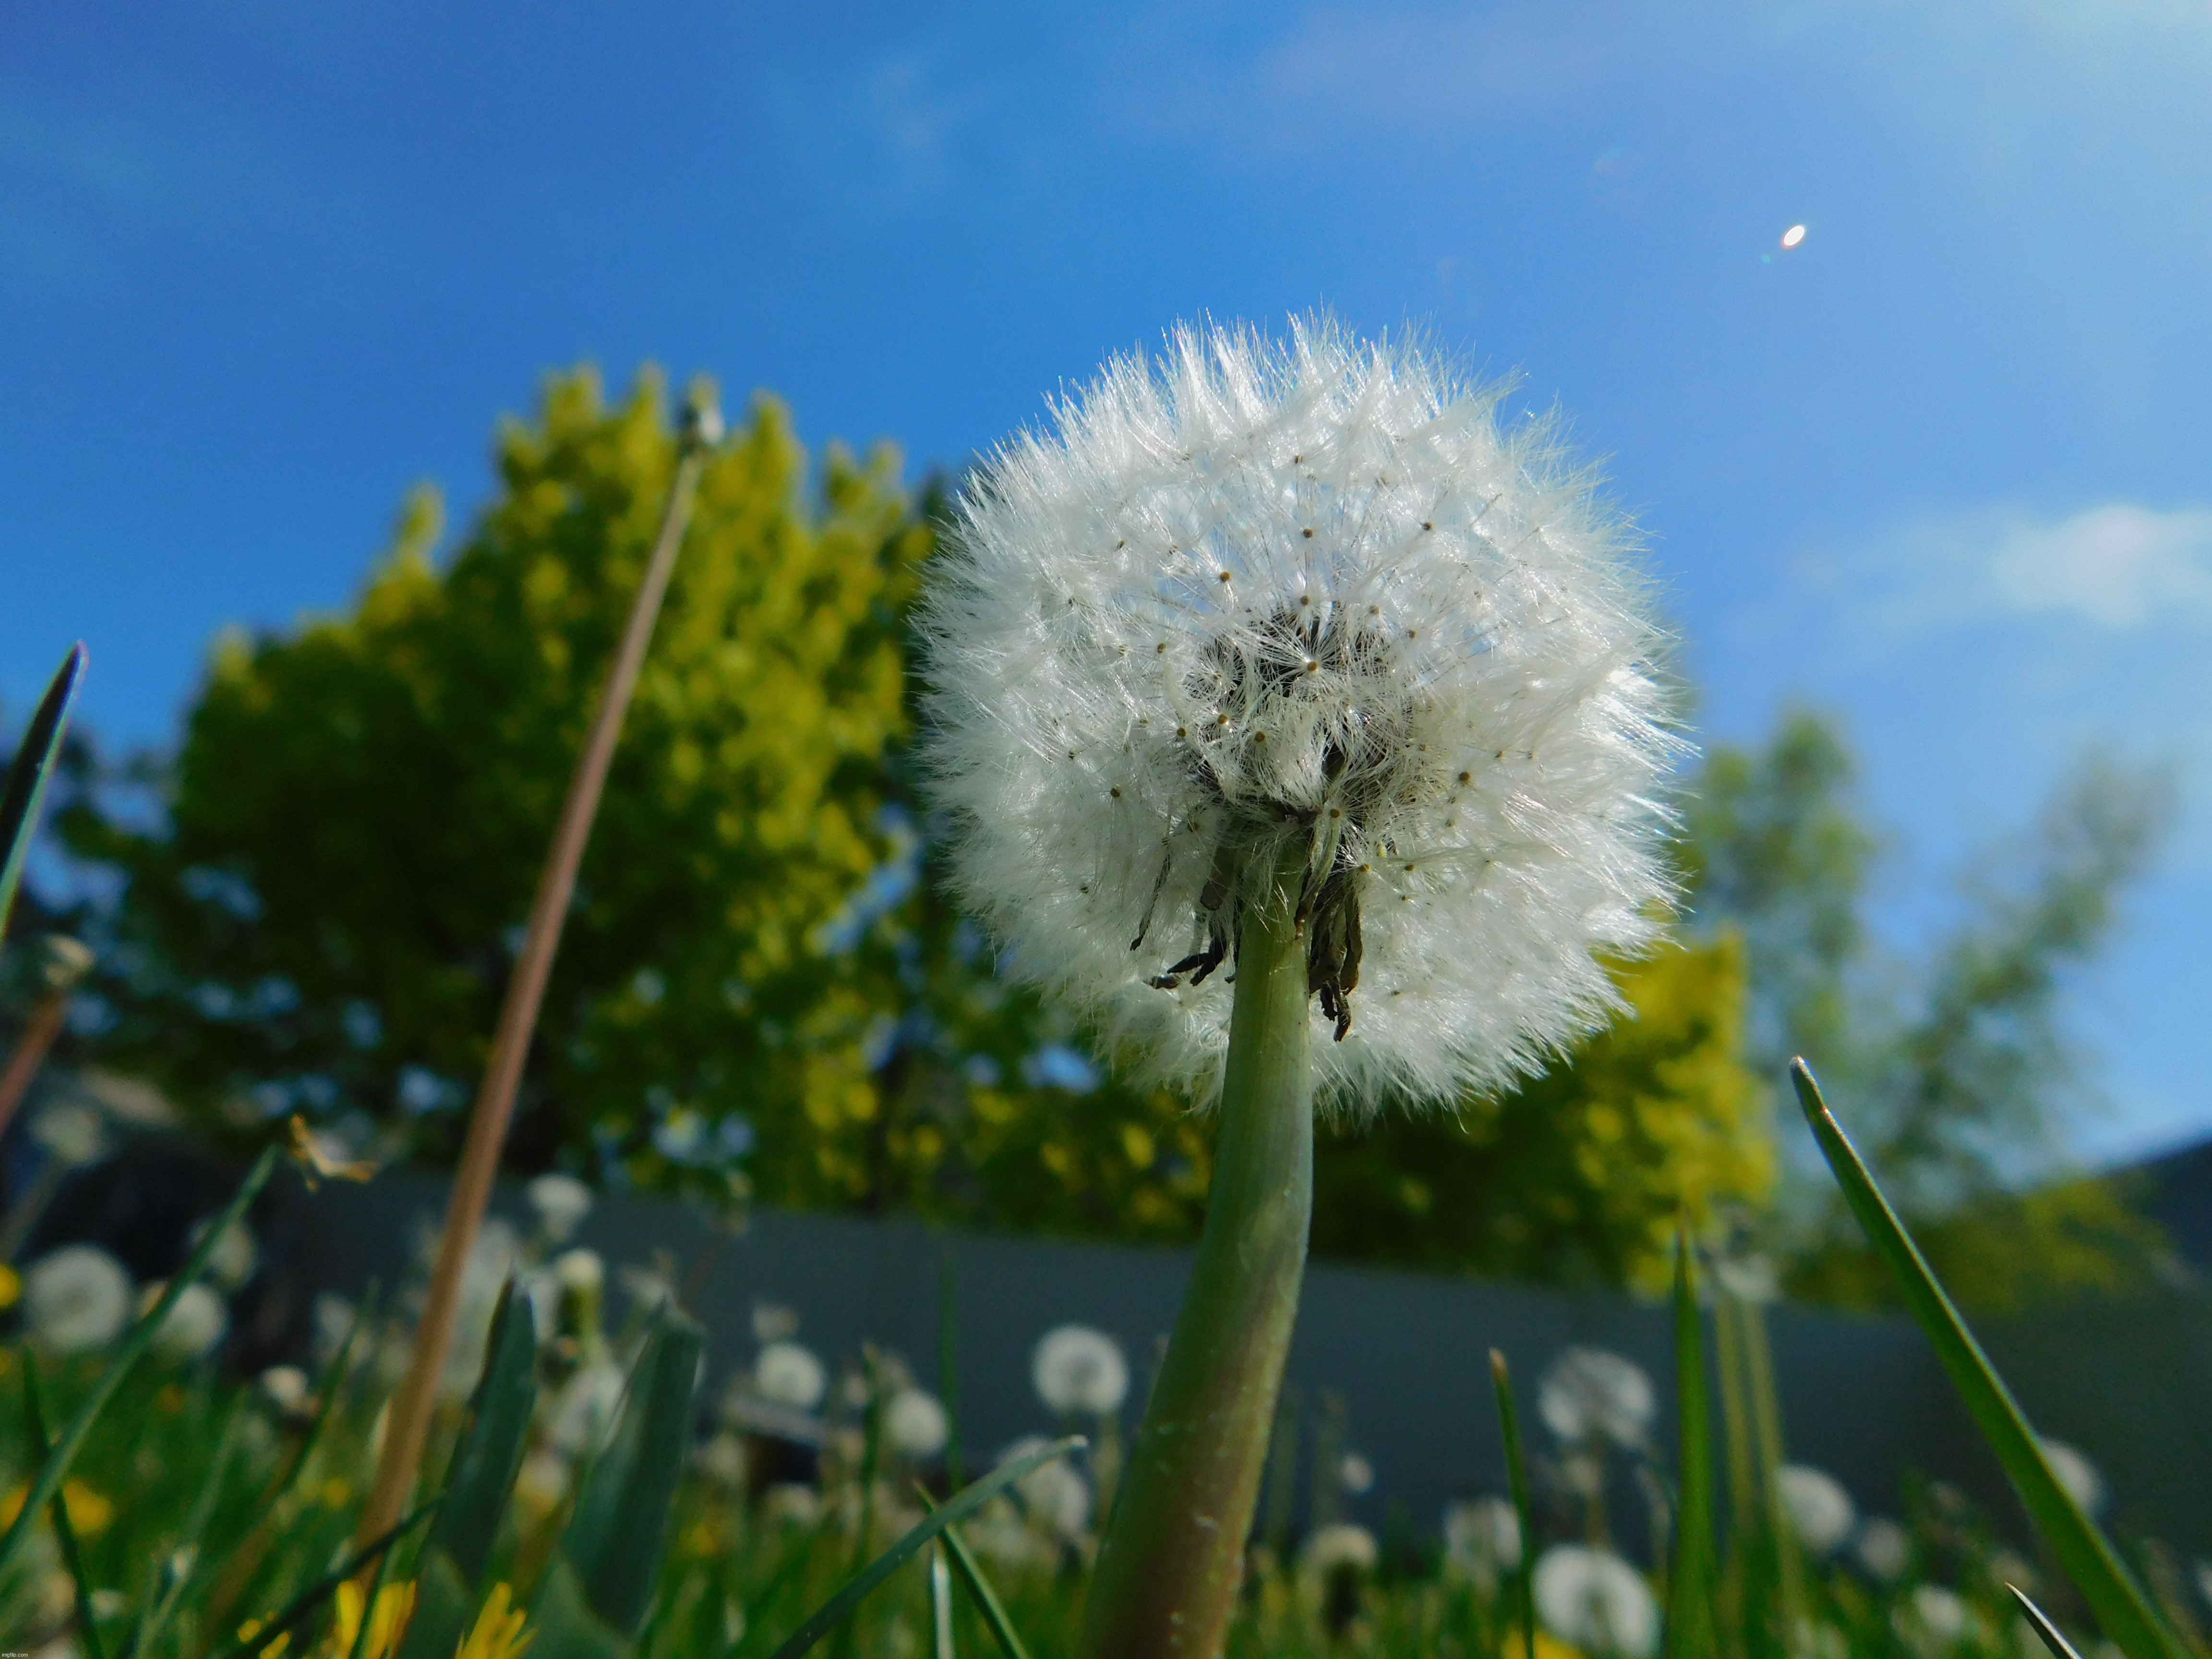 Closeup of dandelion in backyard | image tagged in photography,dandelion | made w/ Imgflip meme maker